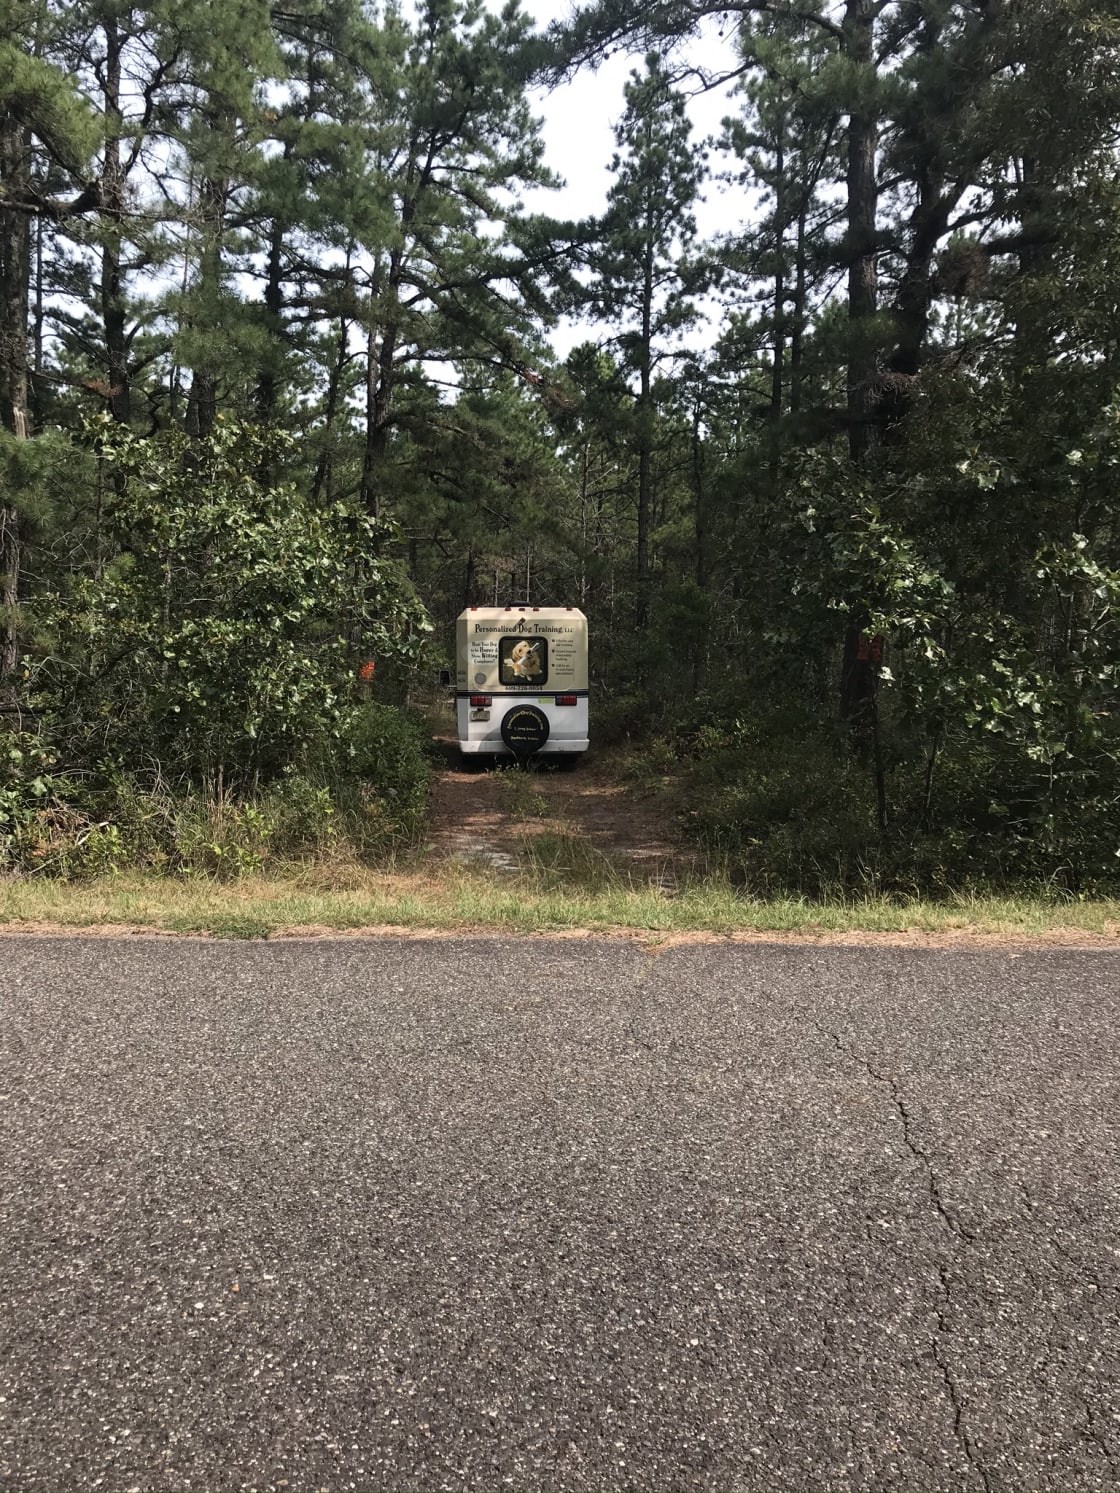 Campsite as seen from the road